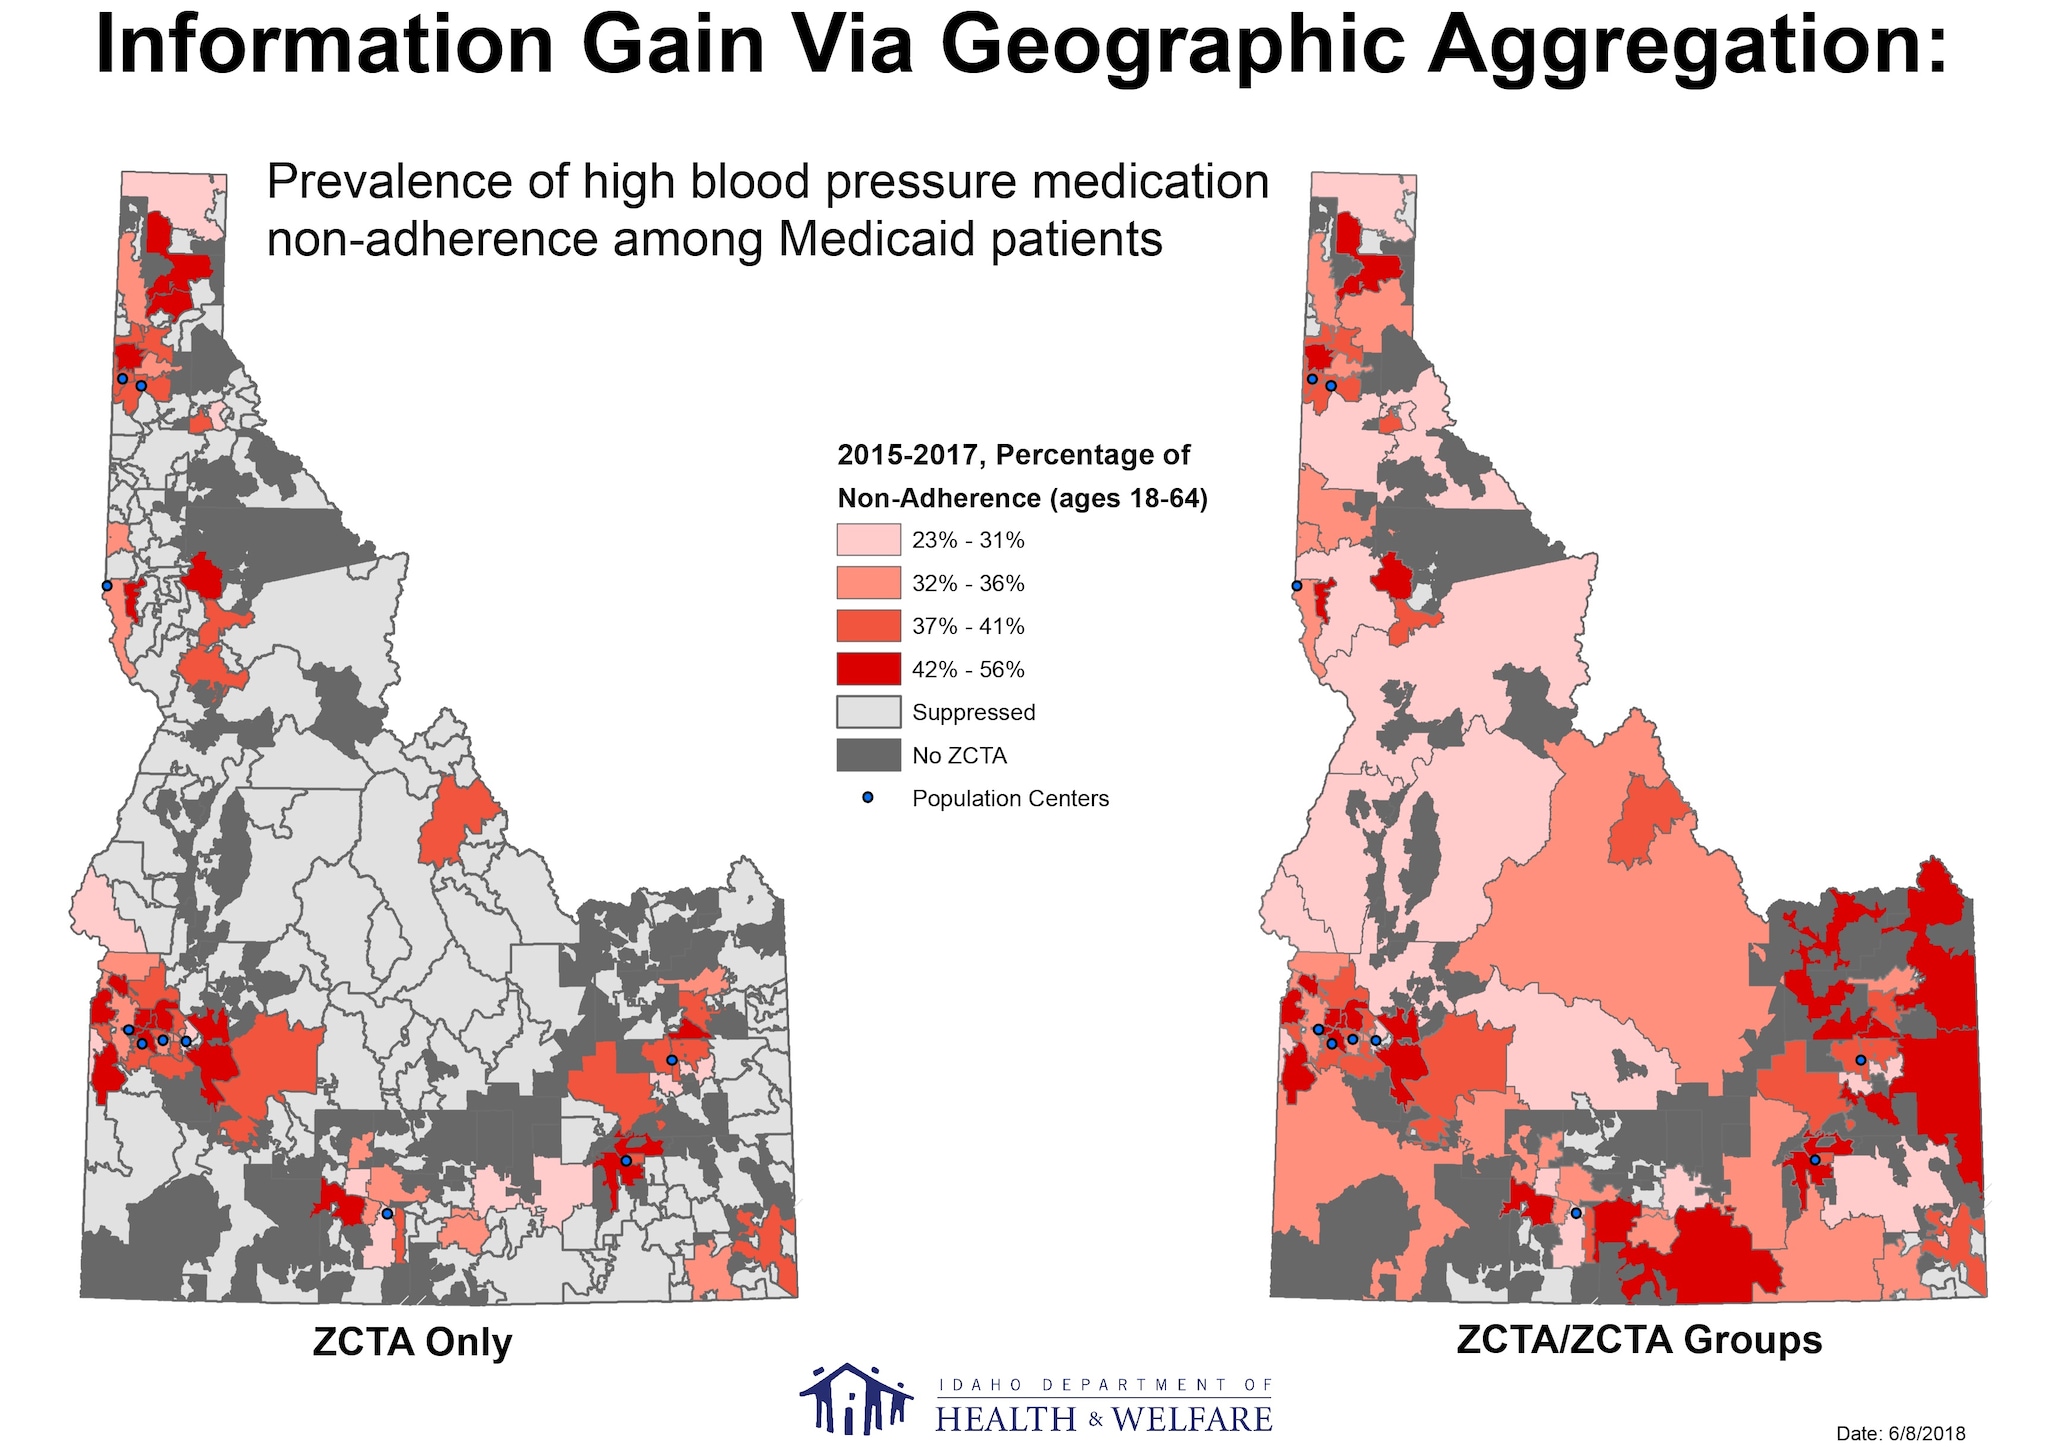 Information Gain Via Geographic Aggregation: prevalence of high blood pressure medication non-adherence among Medicaid patients.